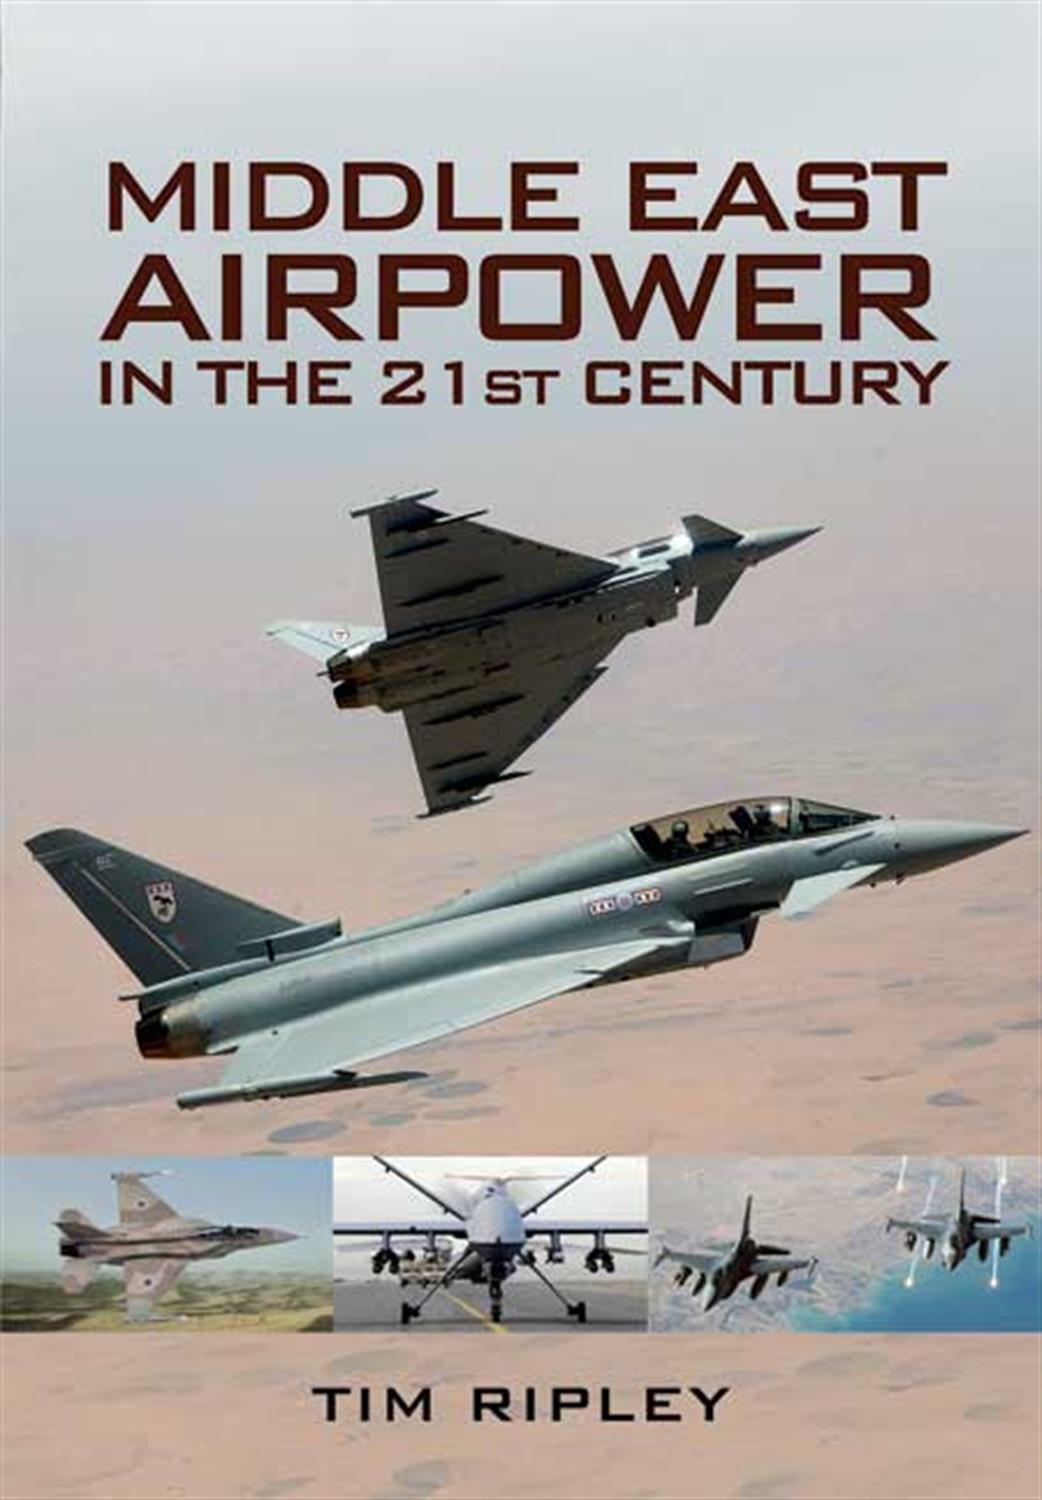 Pen & Sword  9781848840997 Middle East Airpower in the 21st Century by Tim Ripley